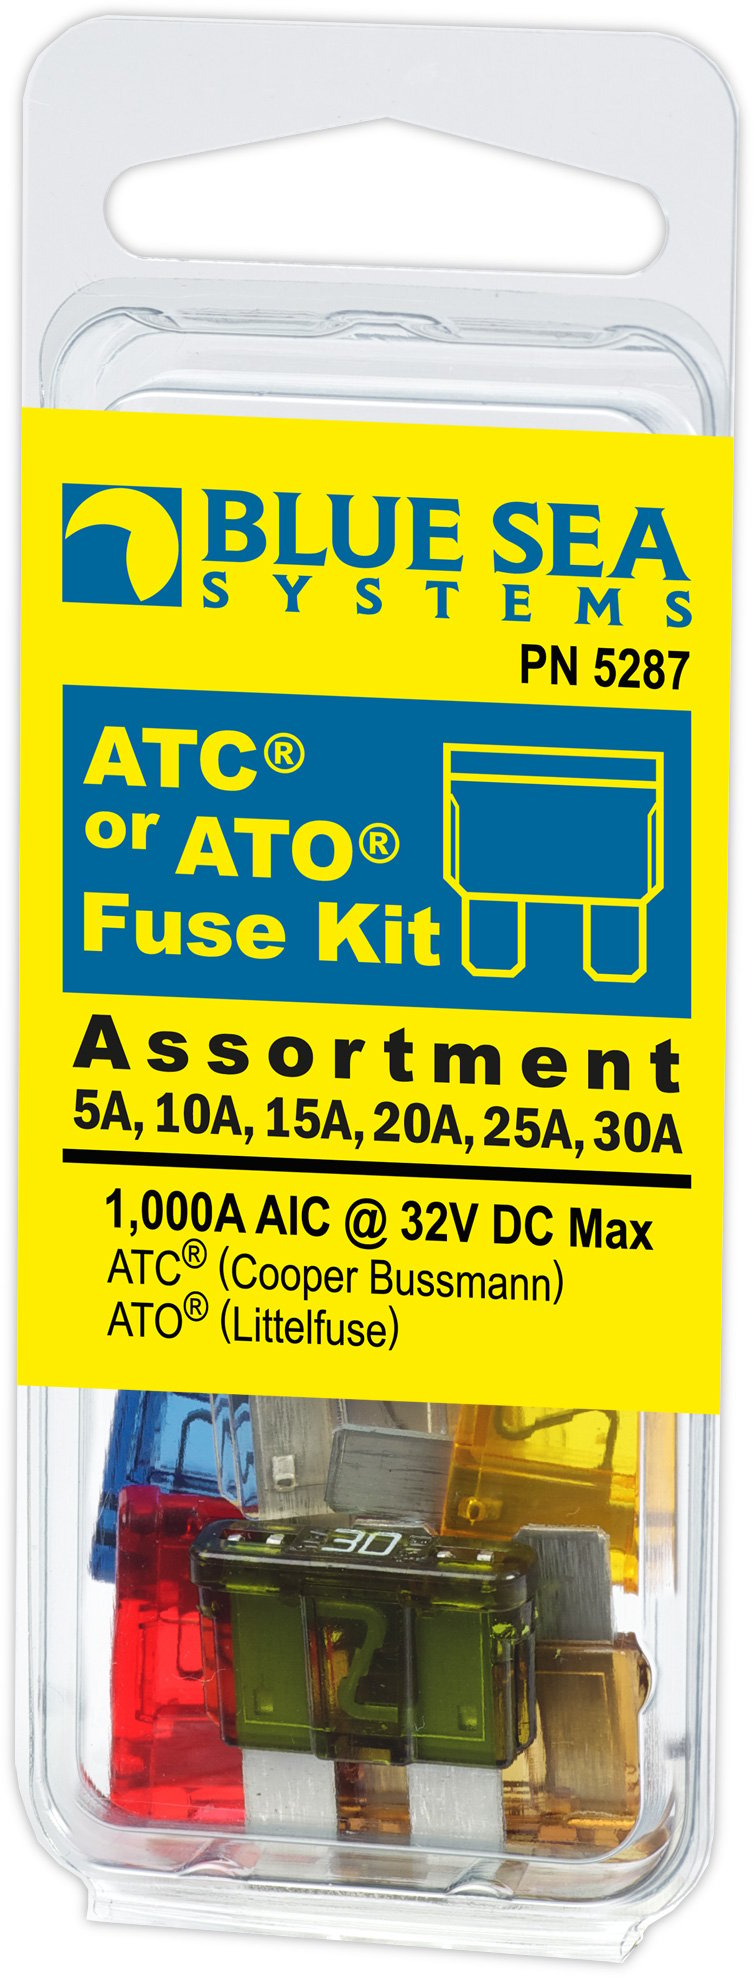 Can I use this ato fuse kit for marine applications?